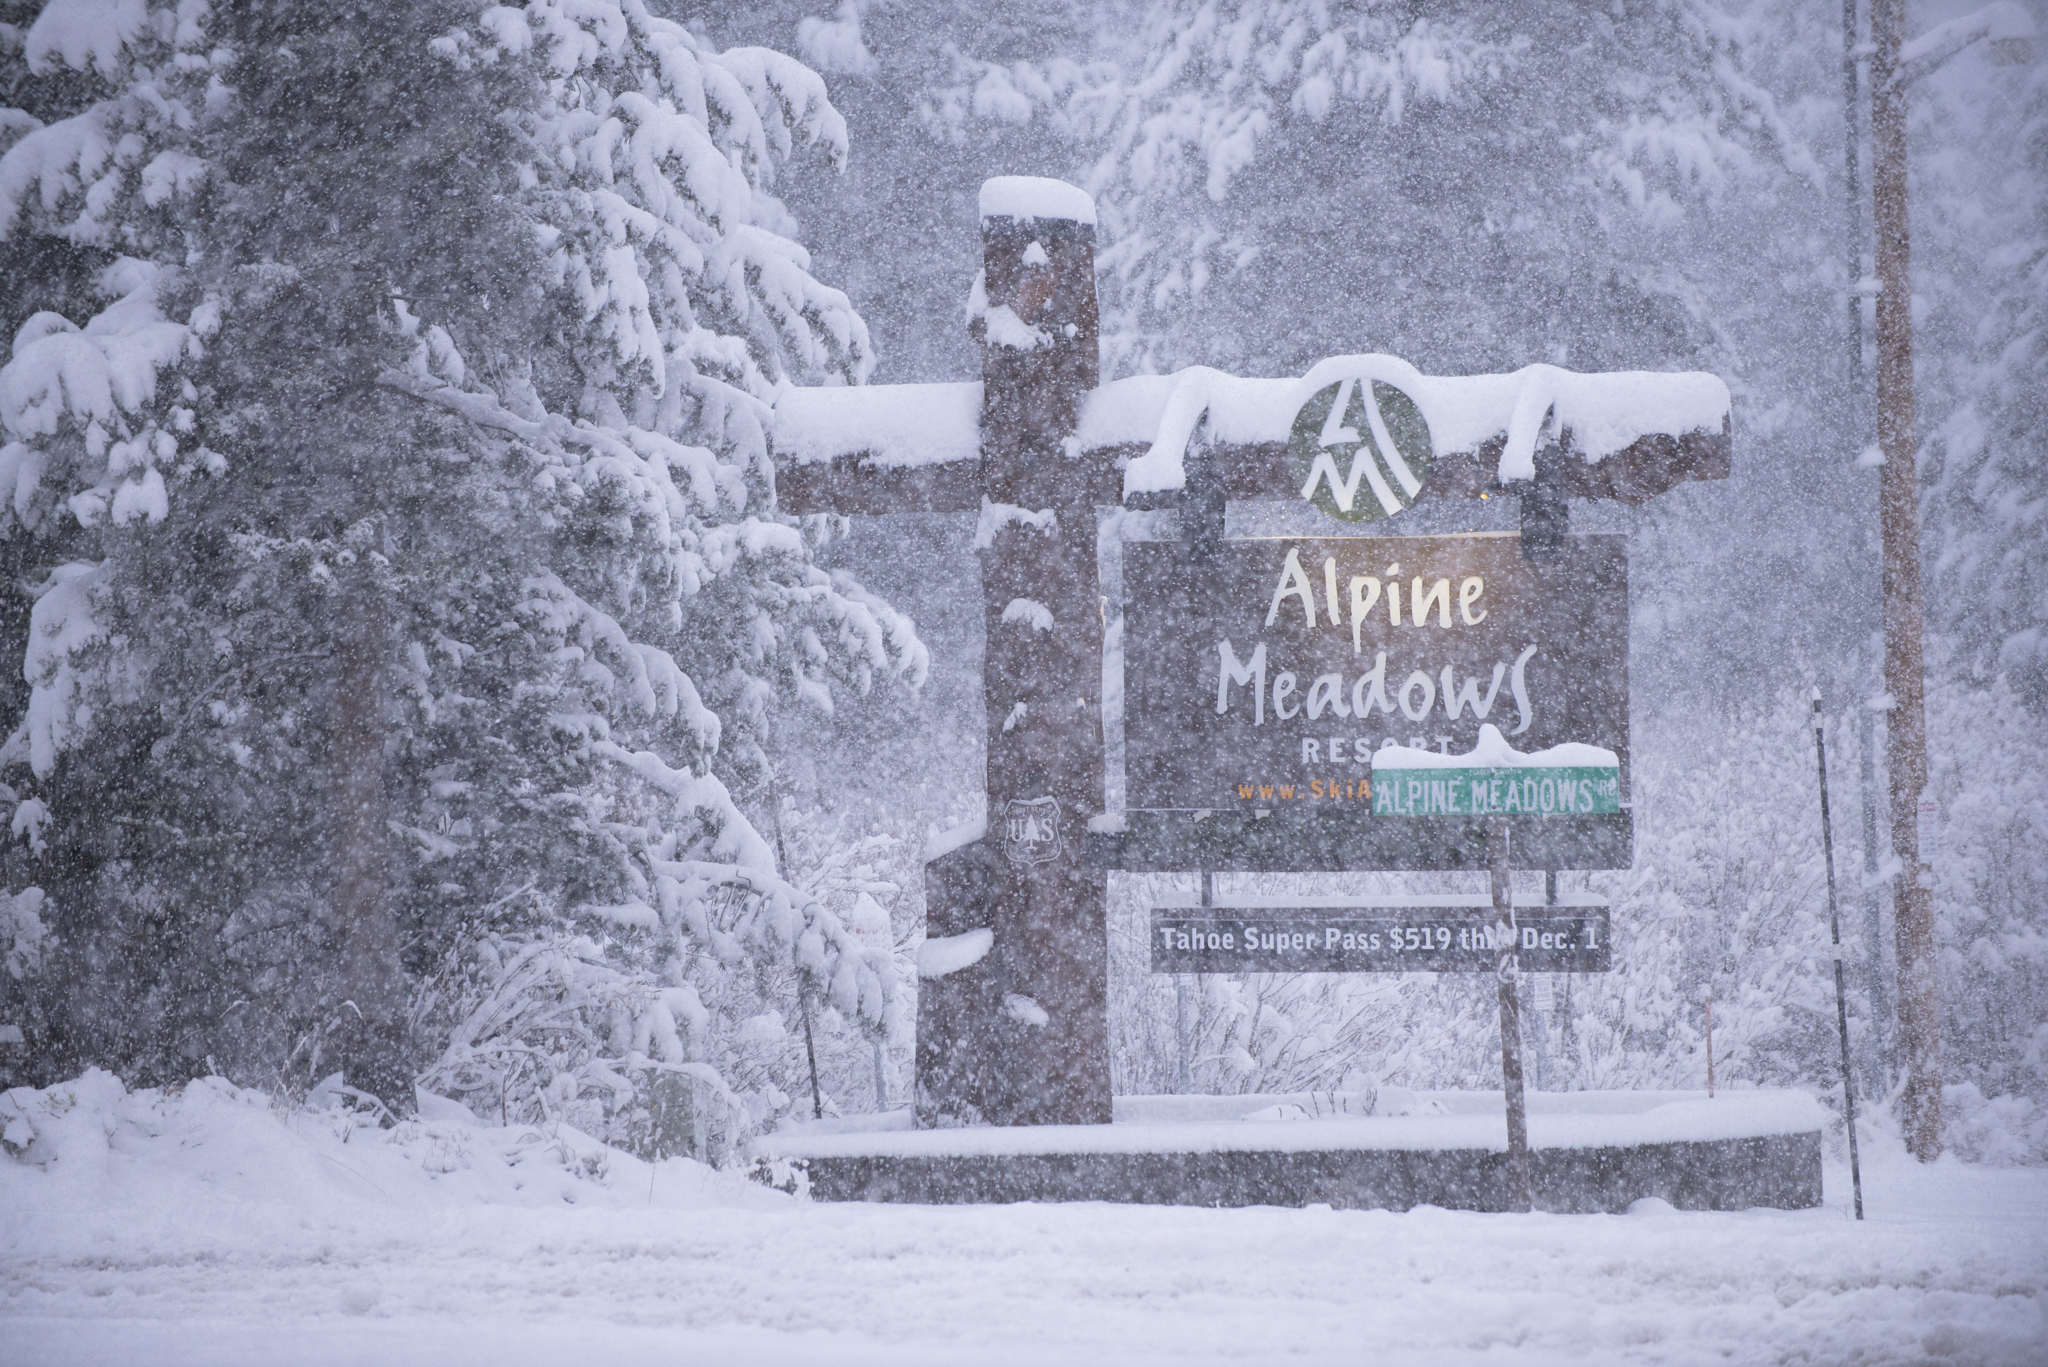 At Alpine Meadows, the white stuff was piling up this morning. (Alpine Meadows photo)